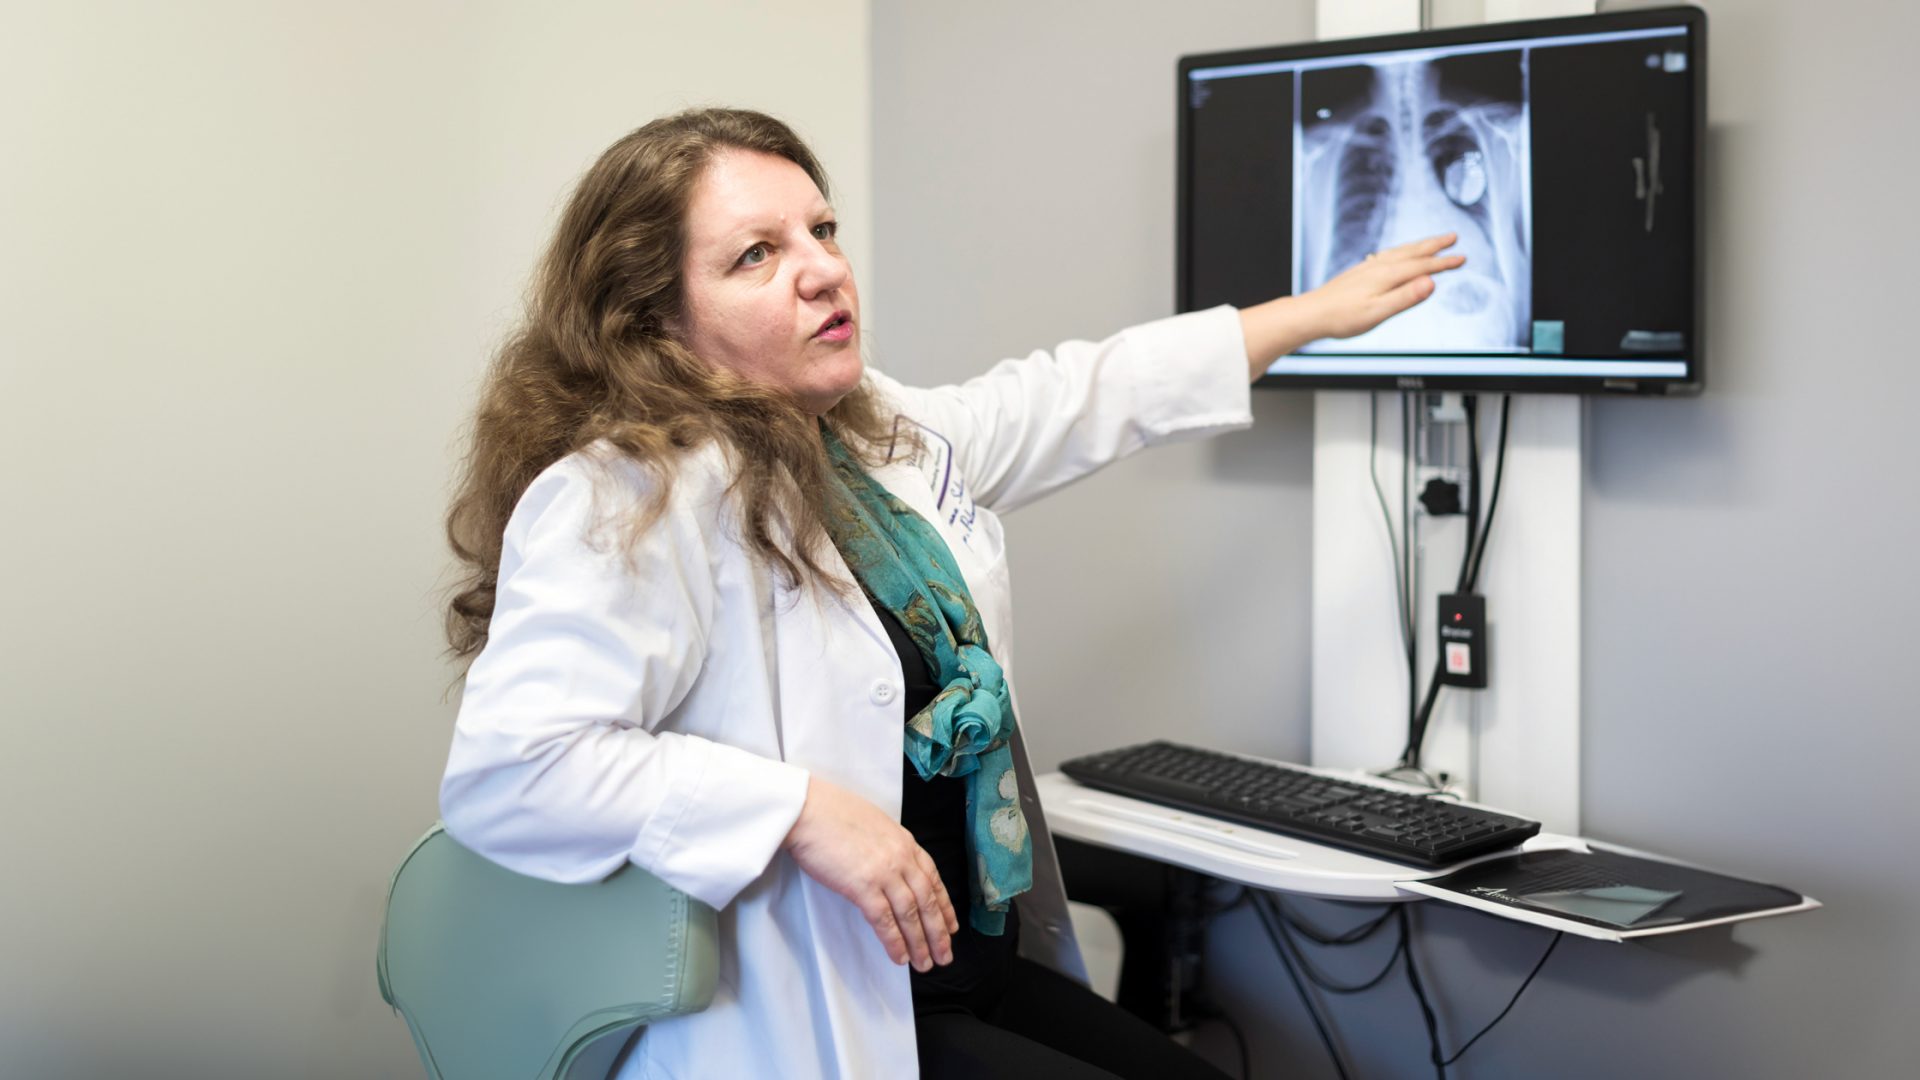 Dr. Roxana Sulica Pointing to Chest Imaging on Computer Screen and Talking to Someone Outside of the Image